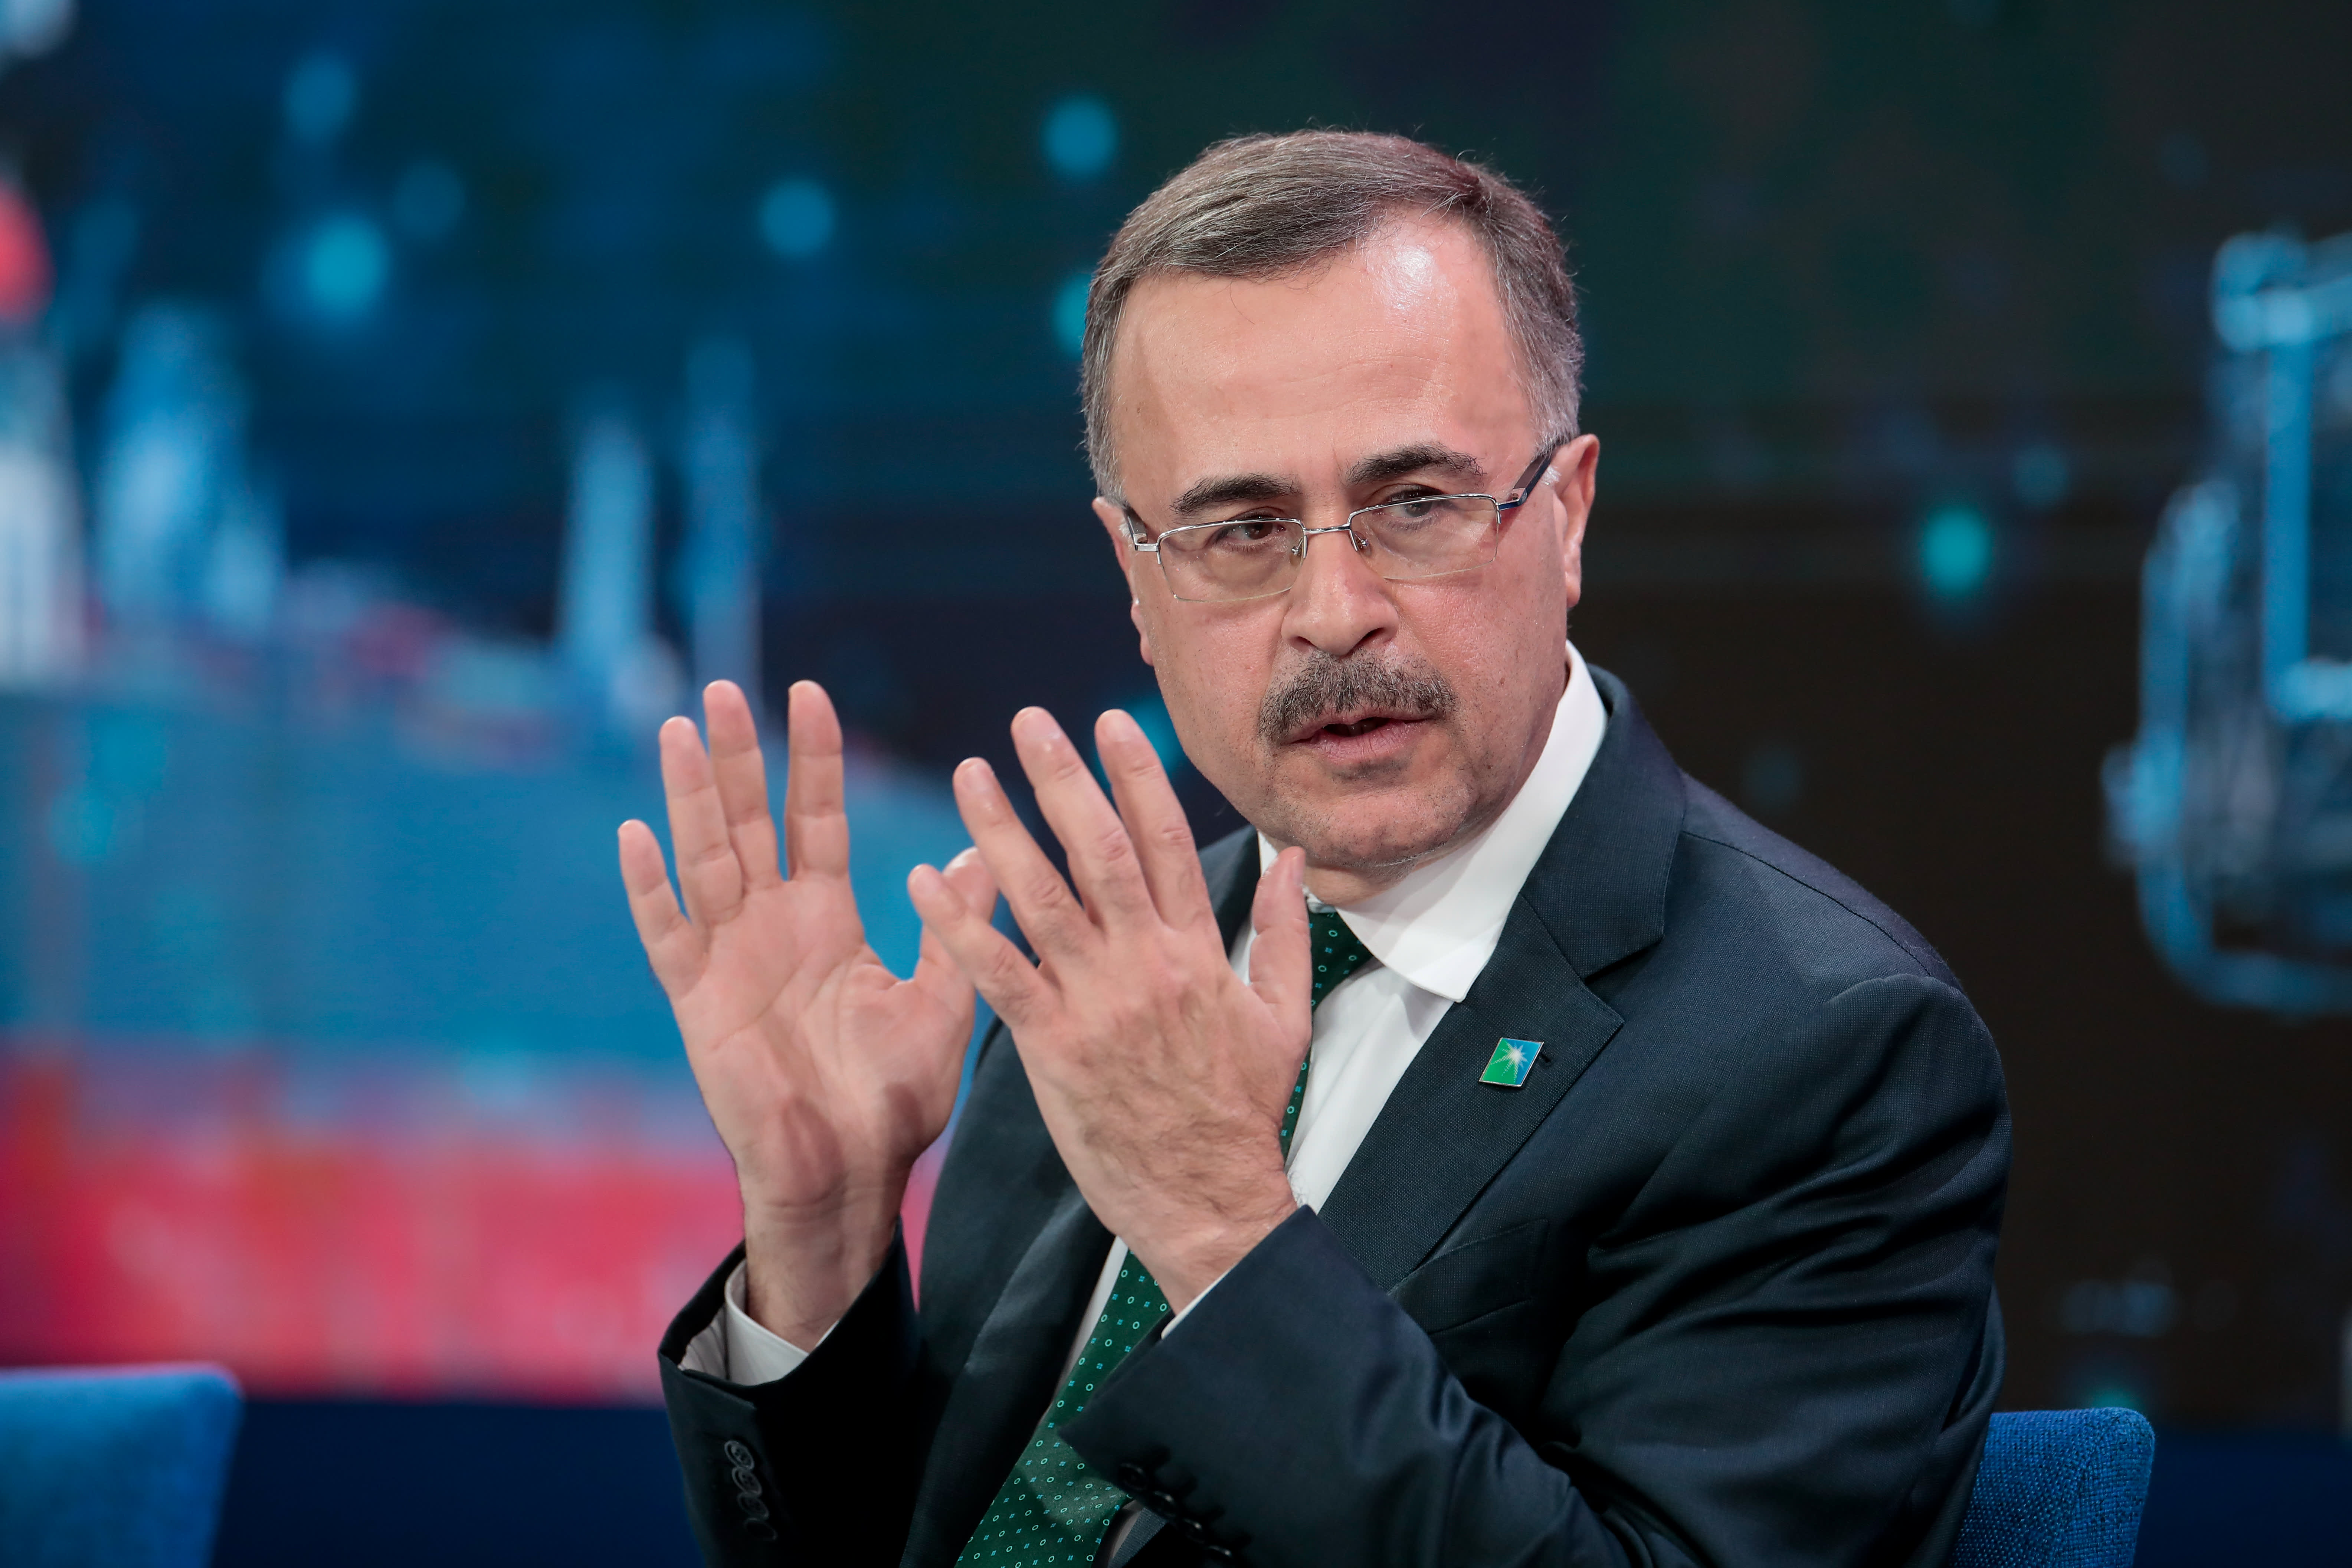 Saudi Aramco CEO says oil giant can still meet dividend expectations as crown prince prioritizes investments - CNBC